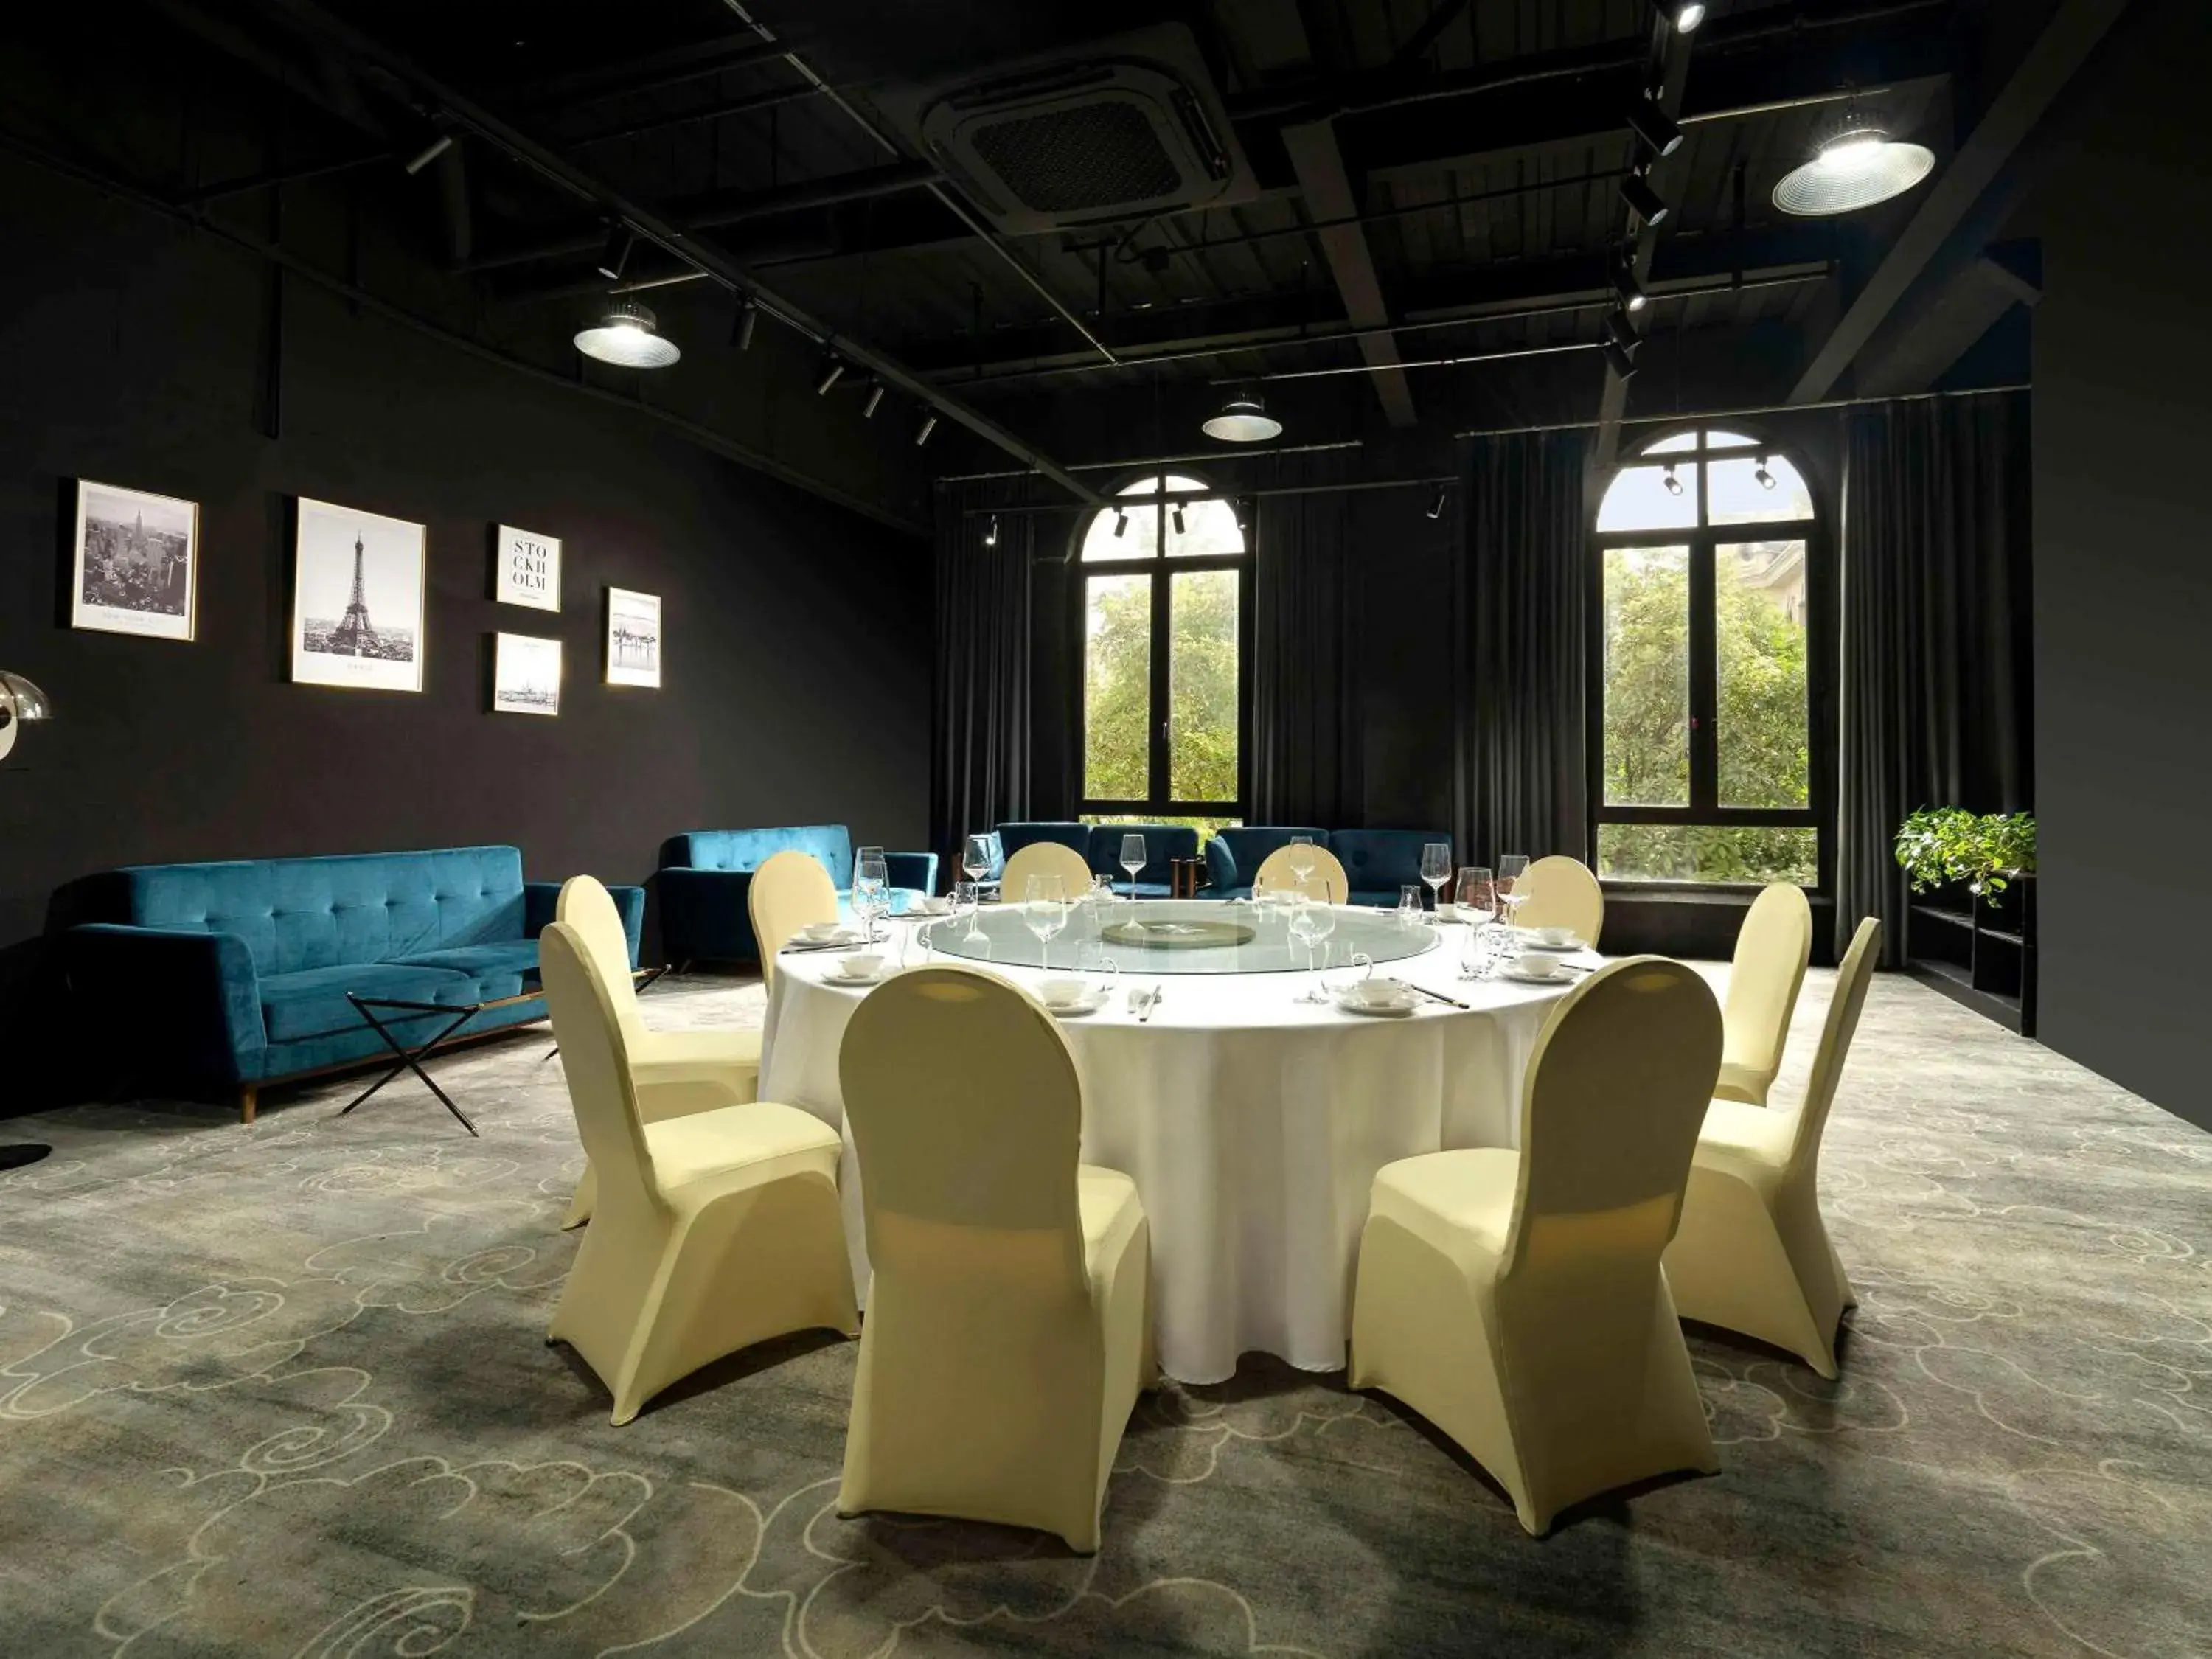 Meeting/conference room in Novotel Shanghai Hongqiao Exhibition Center